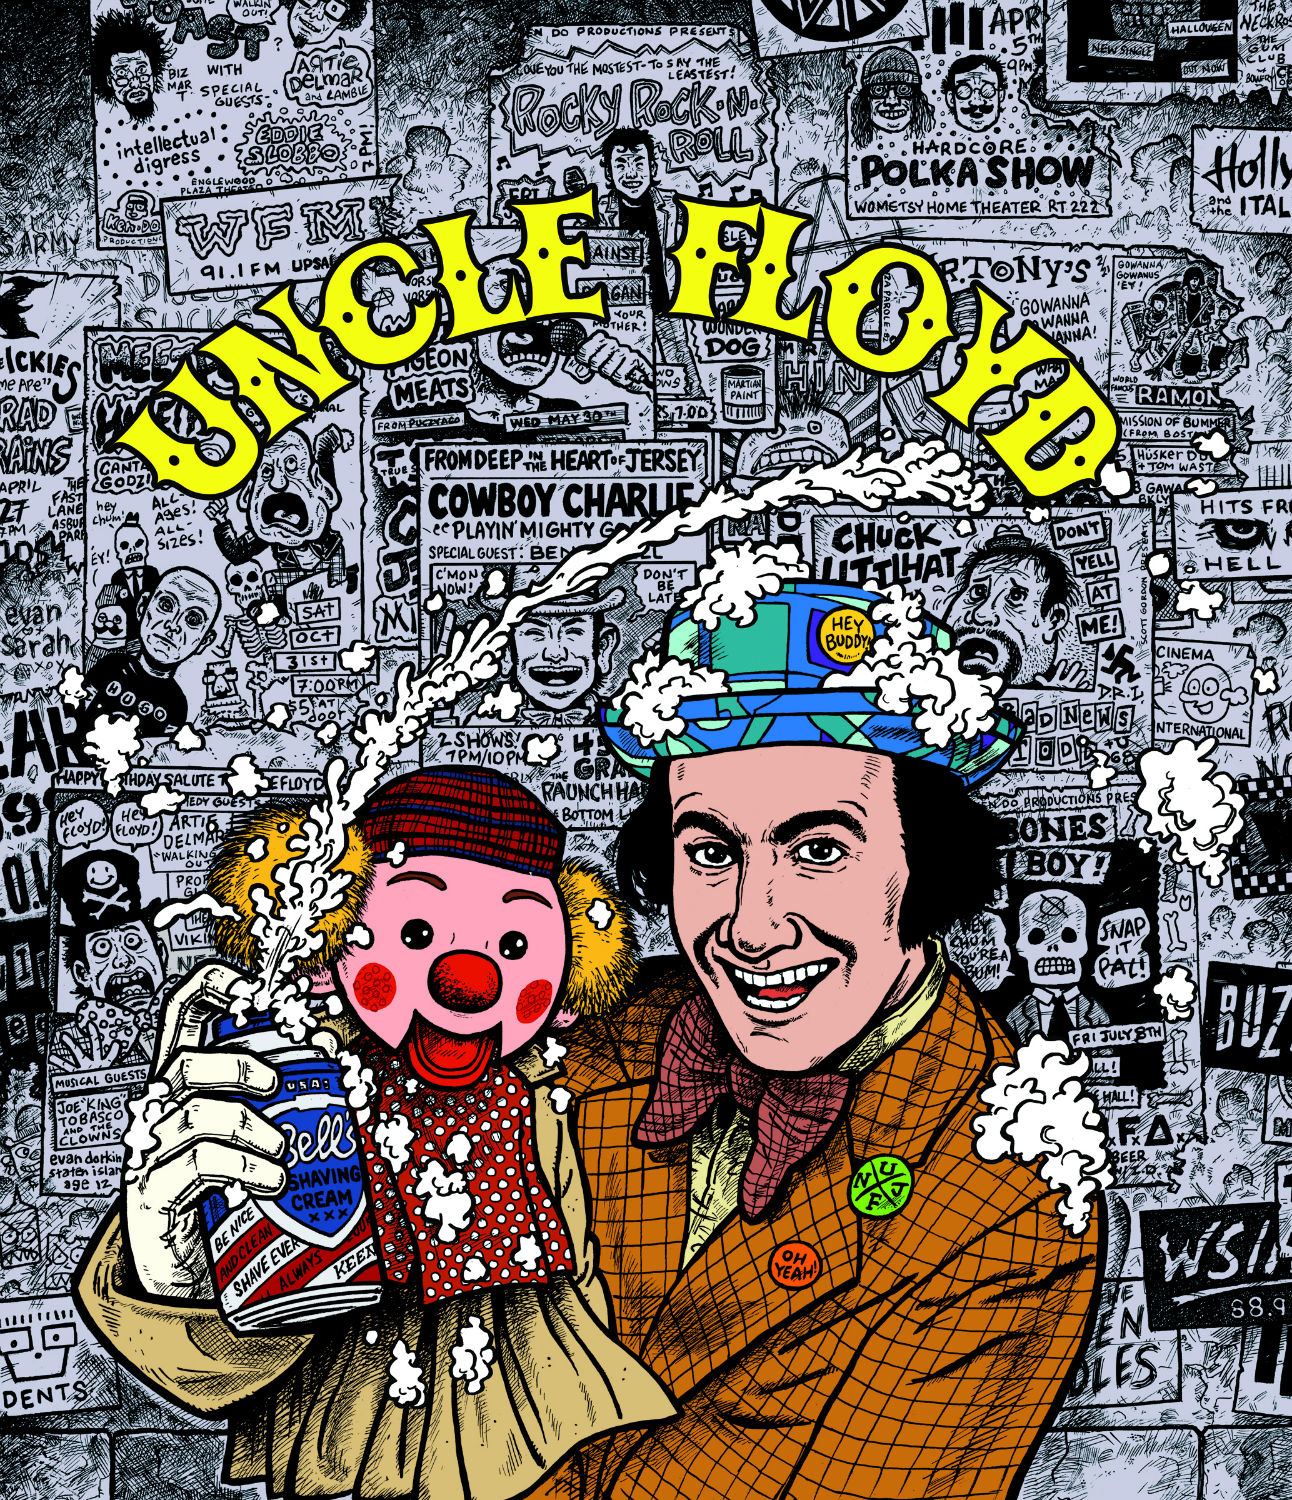 Uncle Floyd and Oogie Shaving Cream Artwork by Evan Dorkin and Sarah Dyer. © 2018 Caf Muzeck, LLC. All Rights Reserved